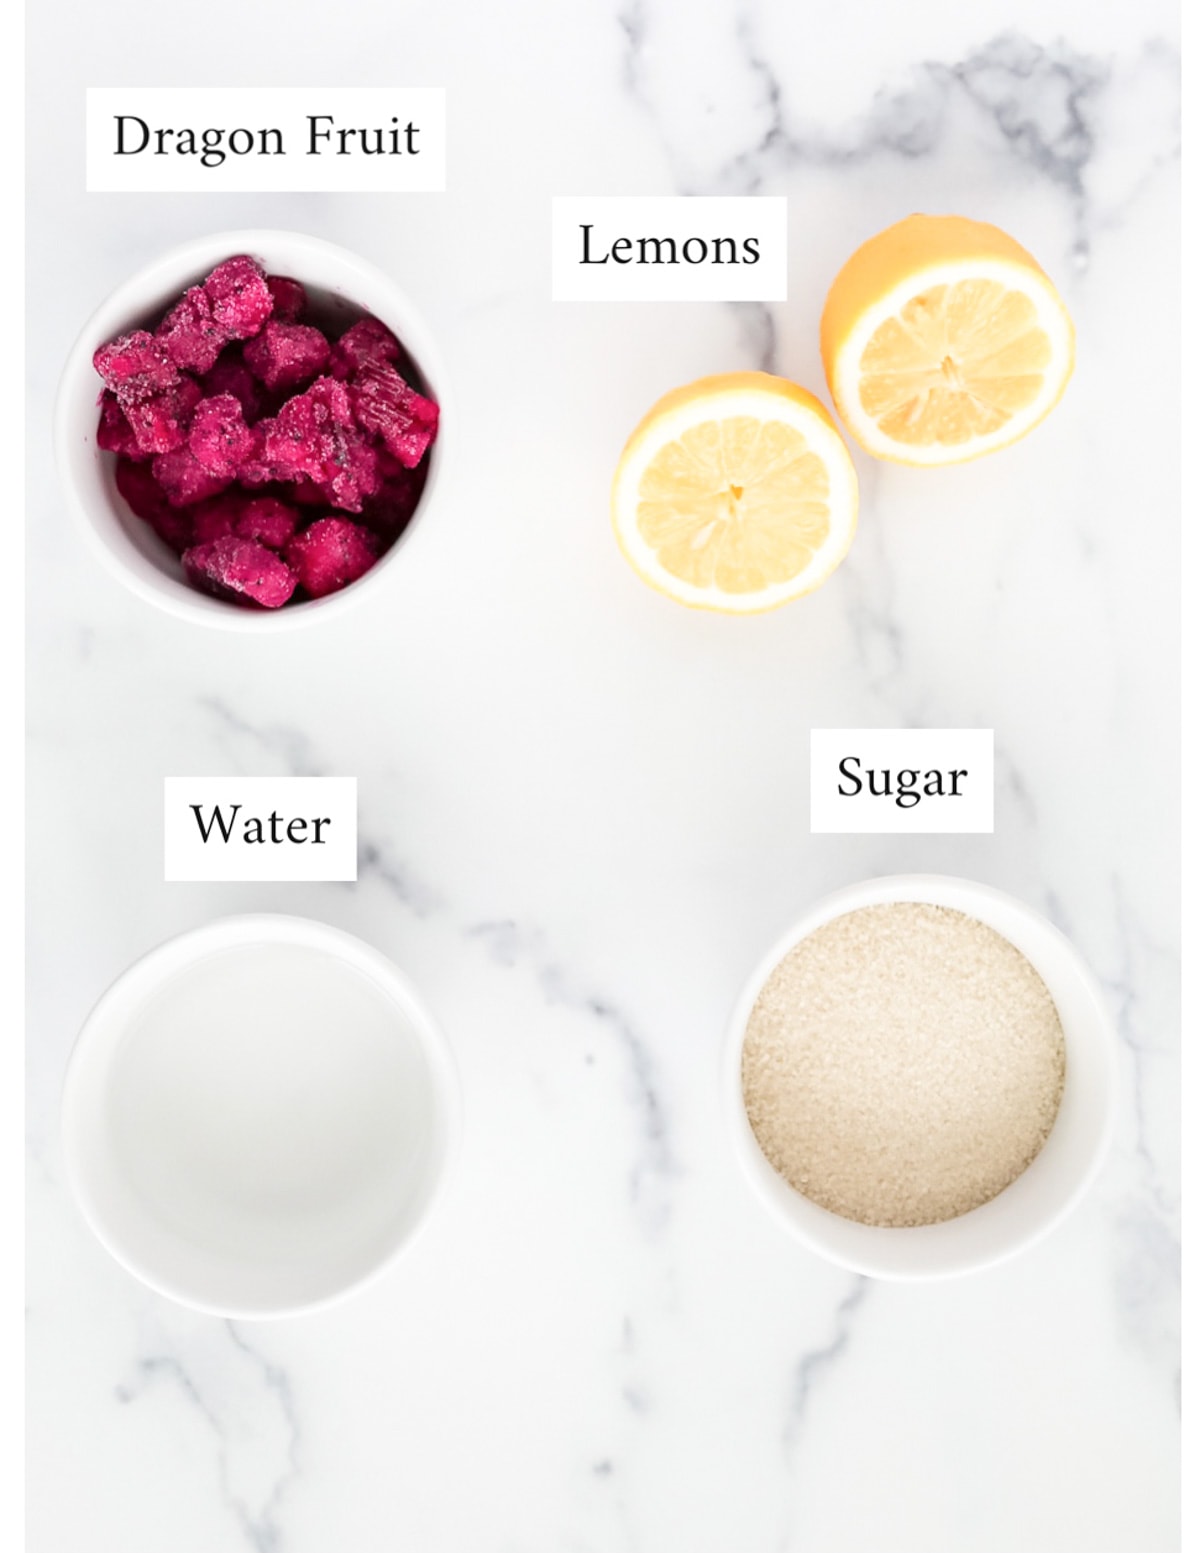 Labeled ingredients including: dragon fruit, lemons, water, and sugar